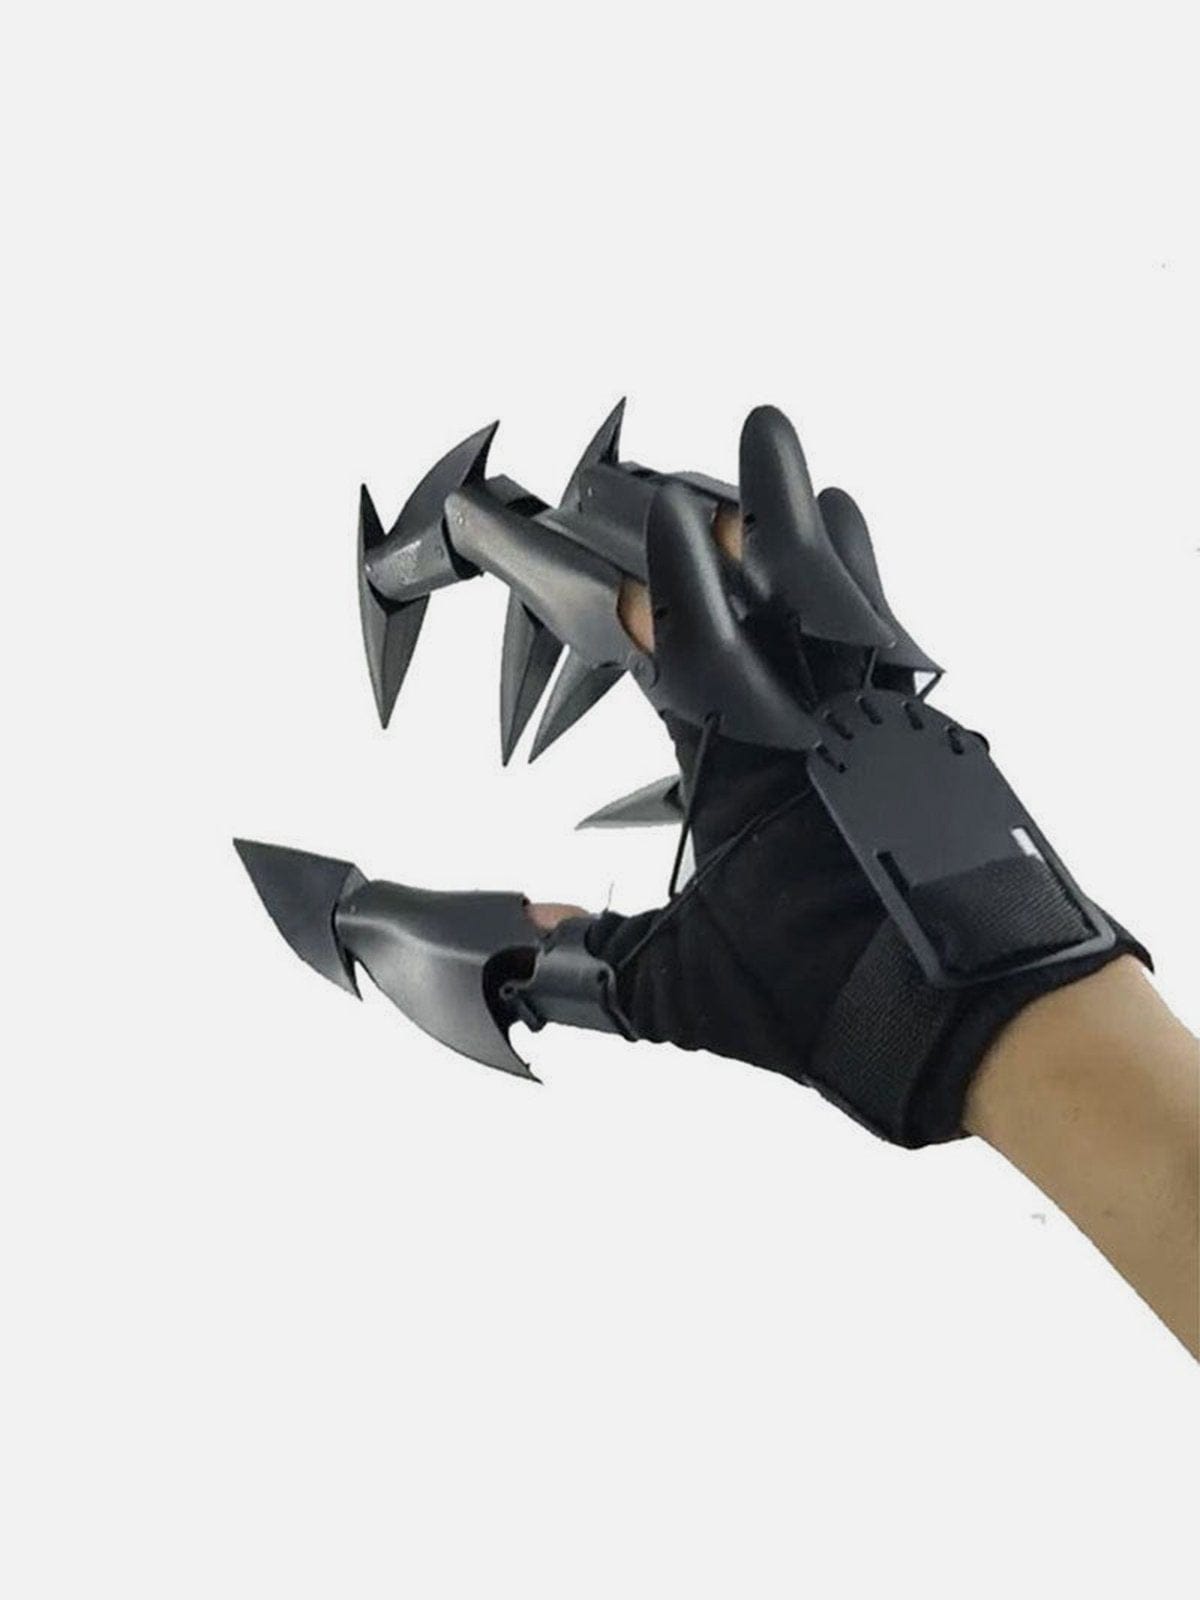 NEV Detachable Knuckle Hand Claws Mechanical Gloves